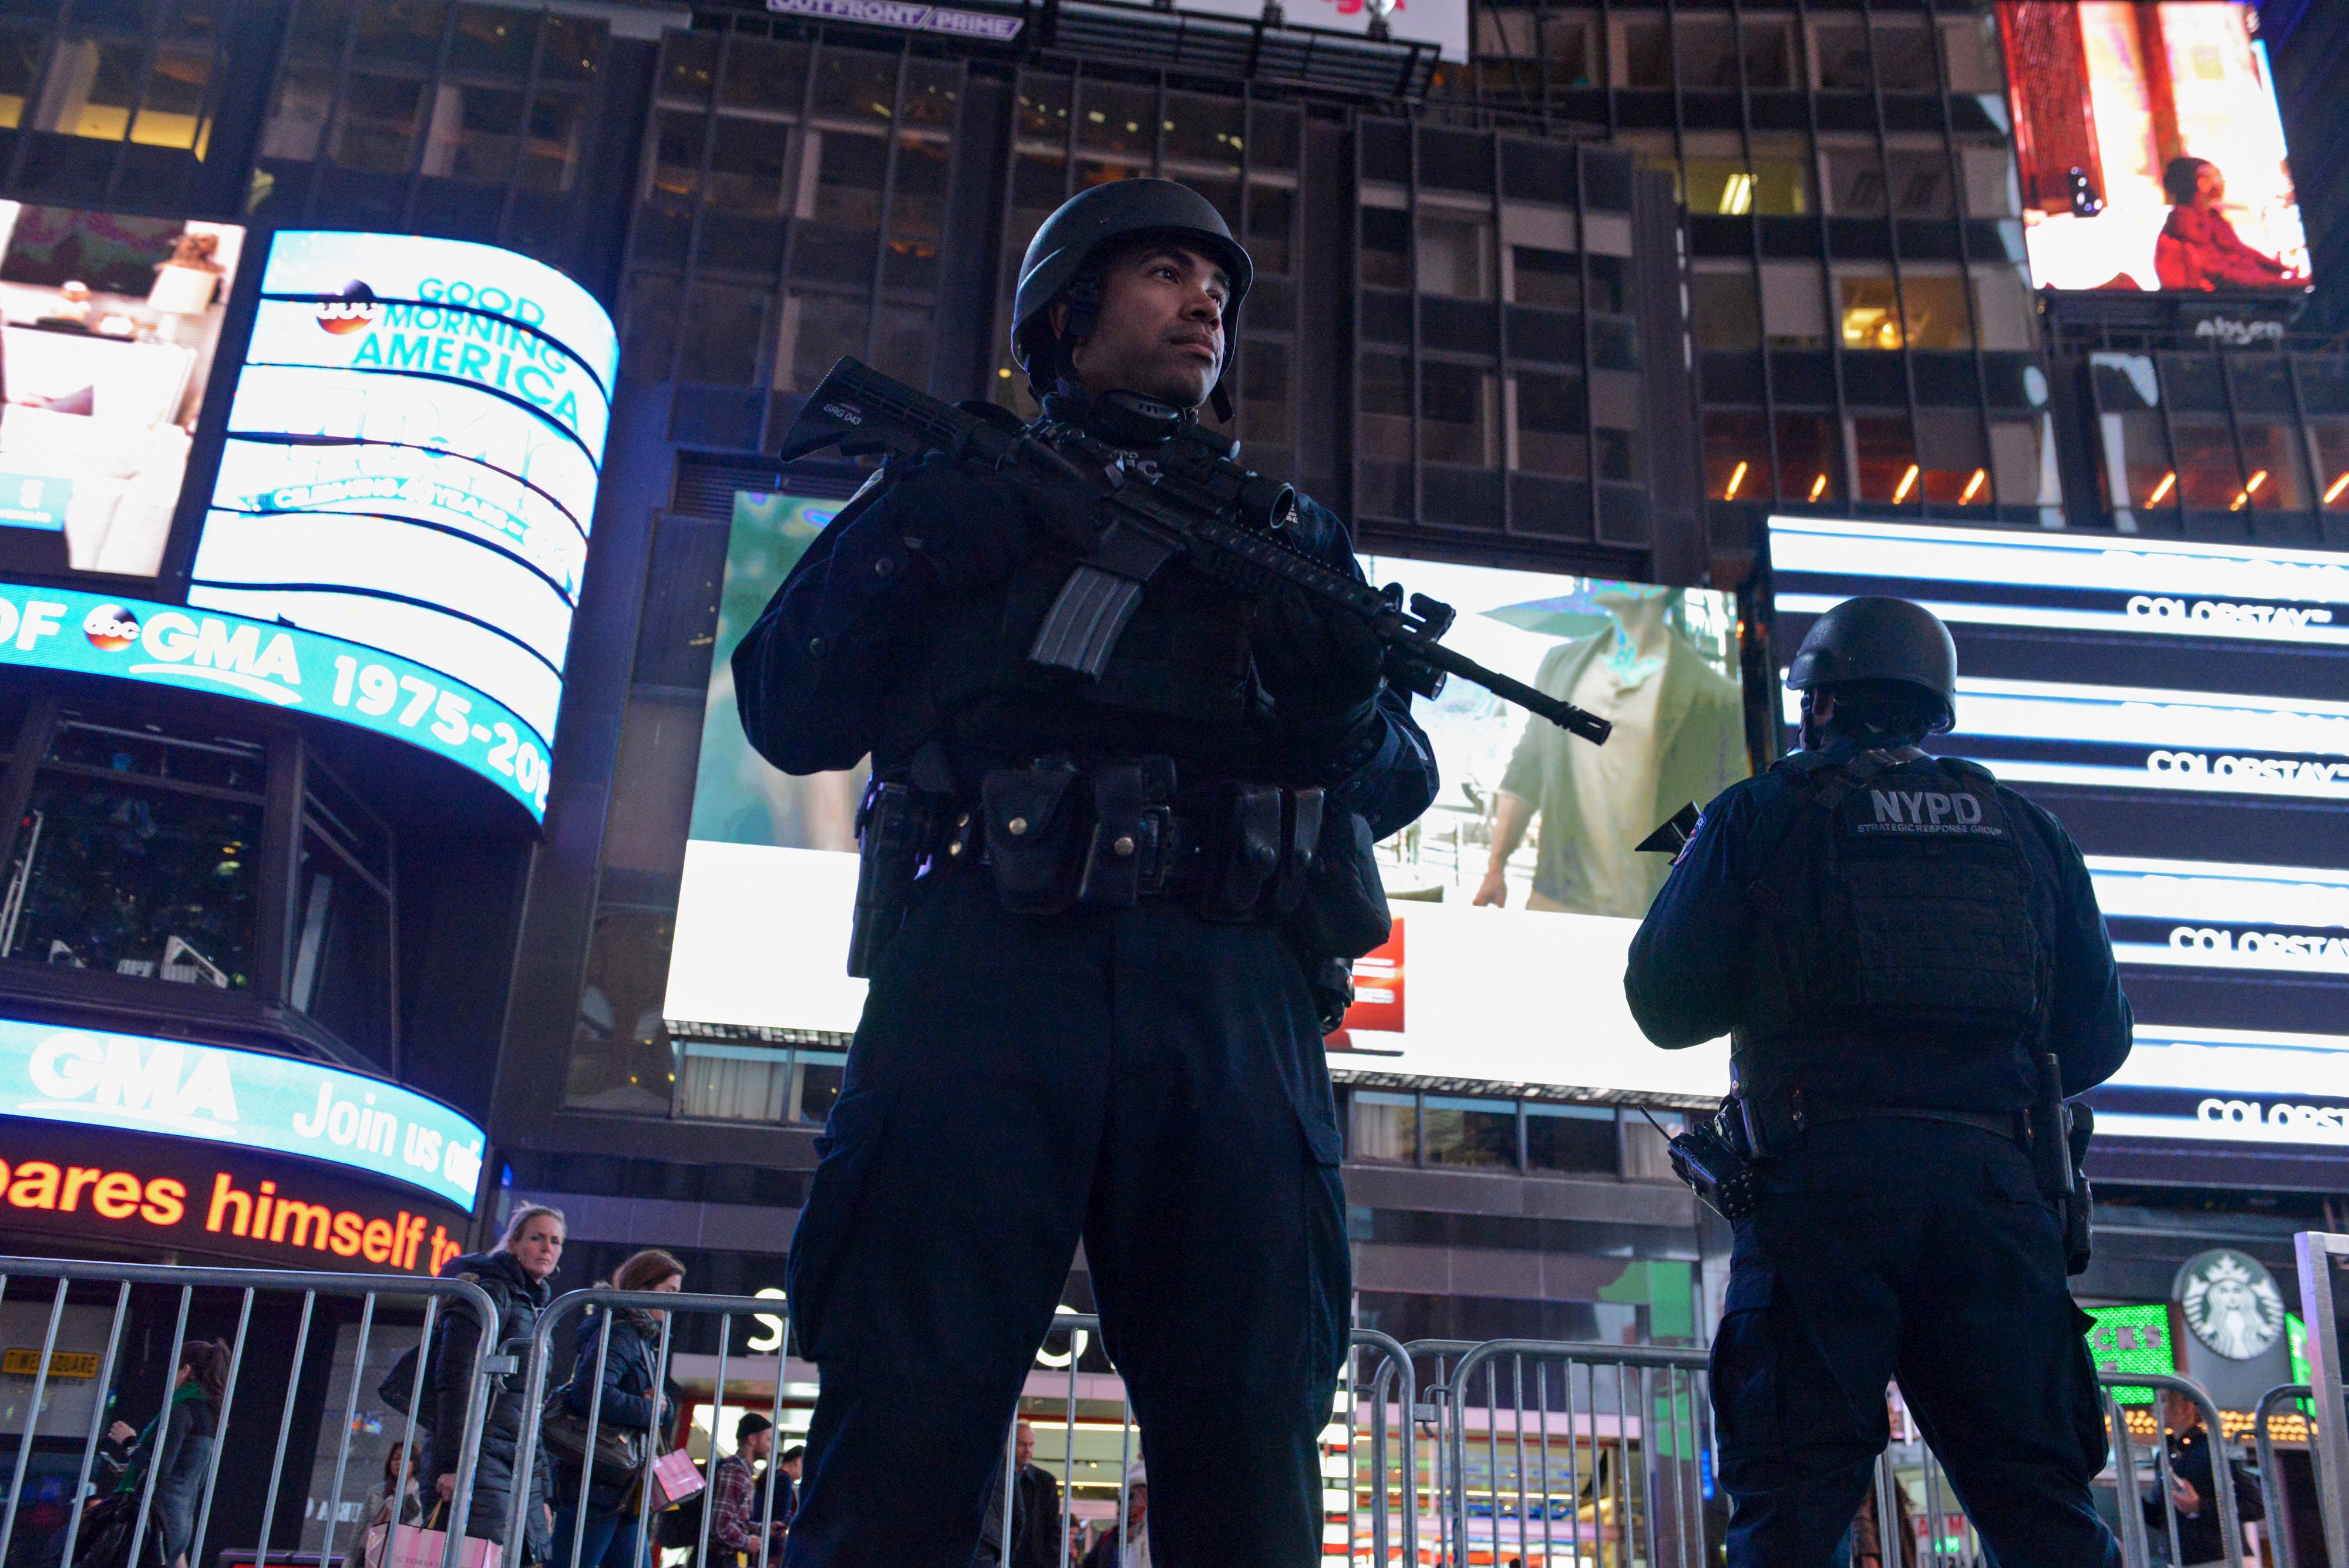 Armed New York City policemen stand guard in Times Square in the Manhattan borough in New York